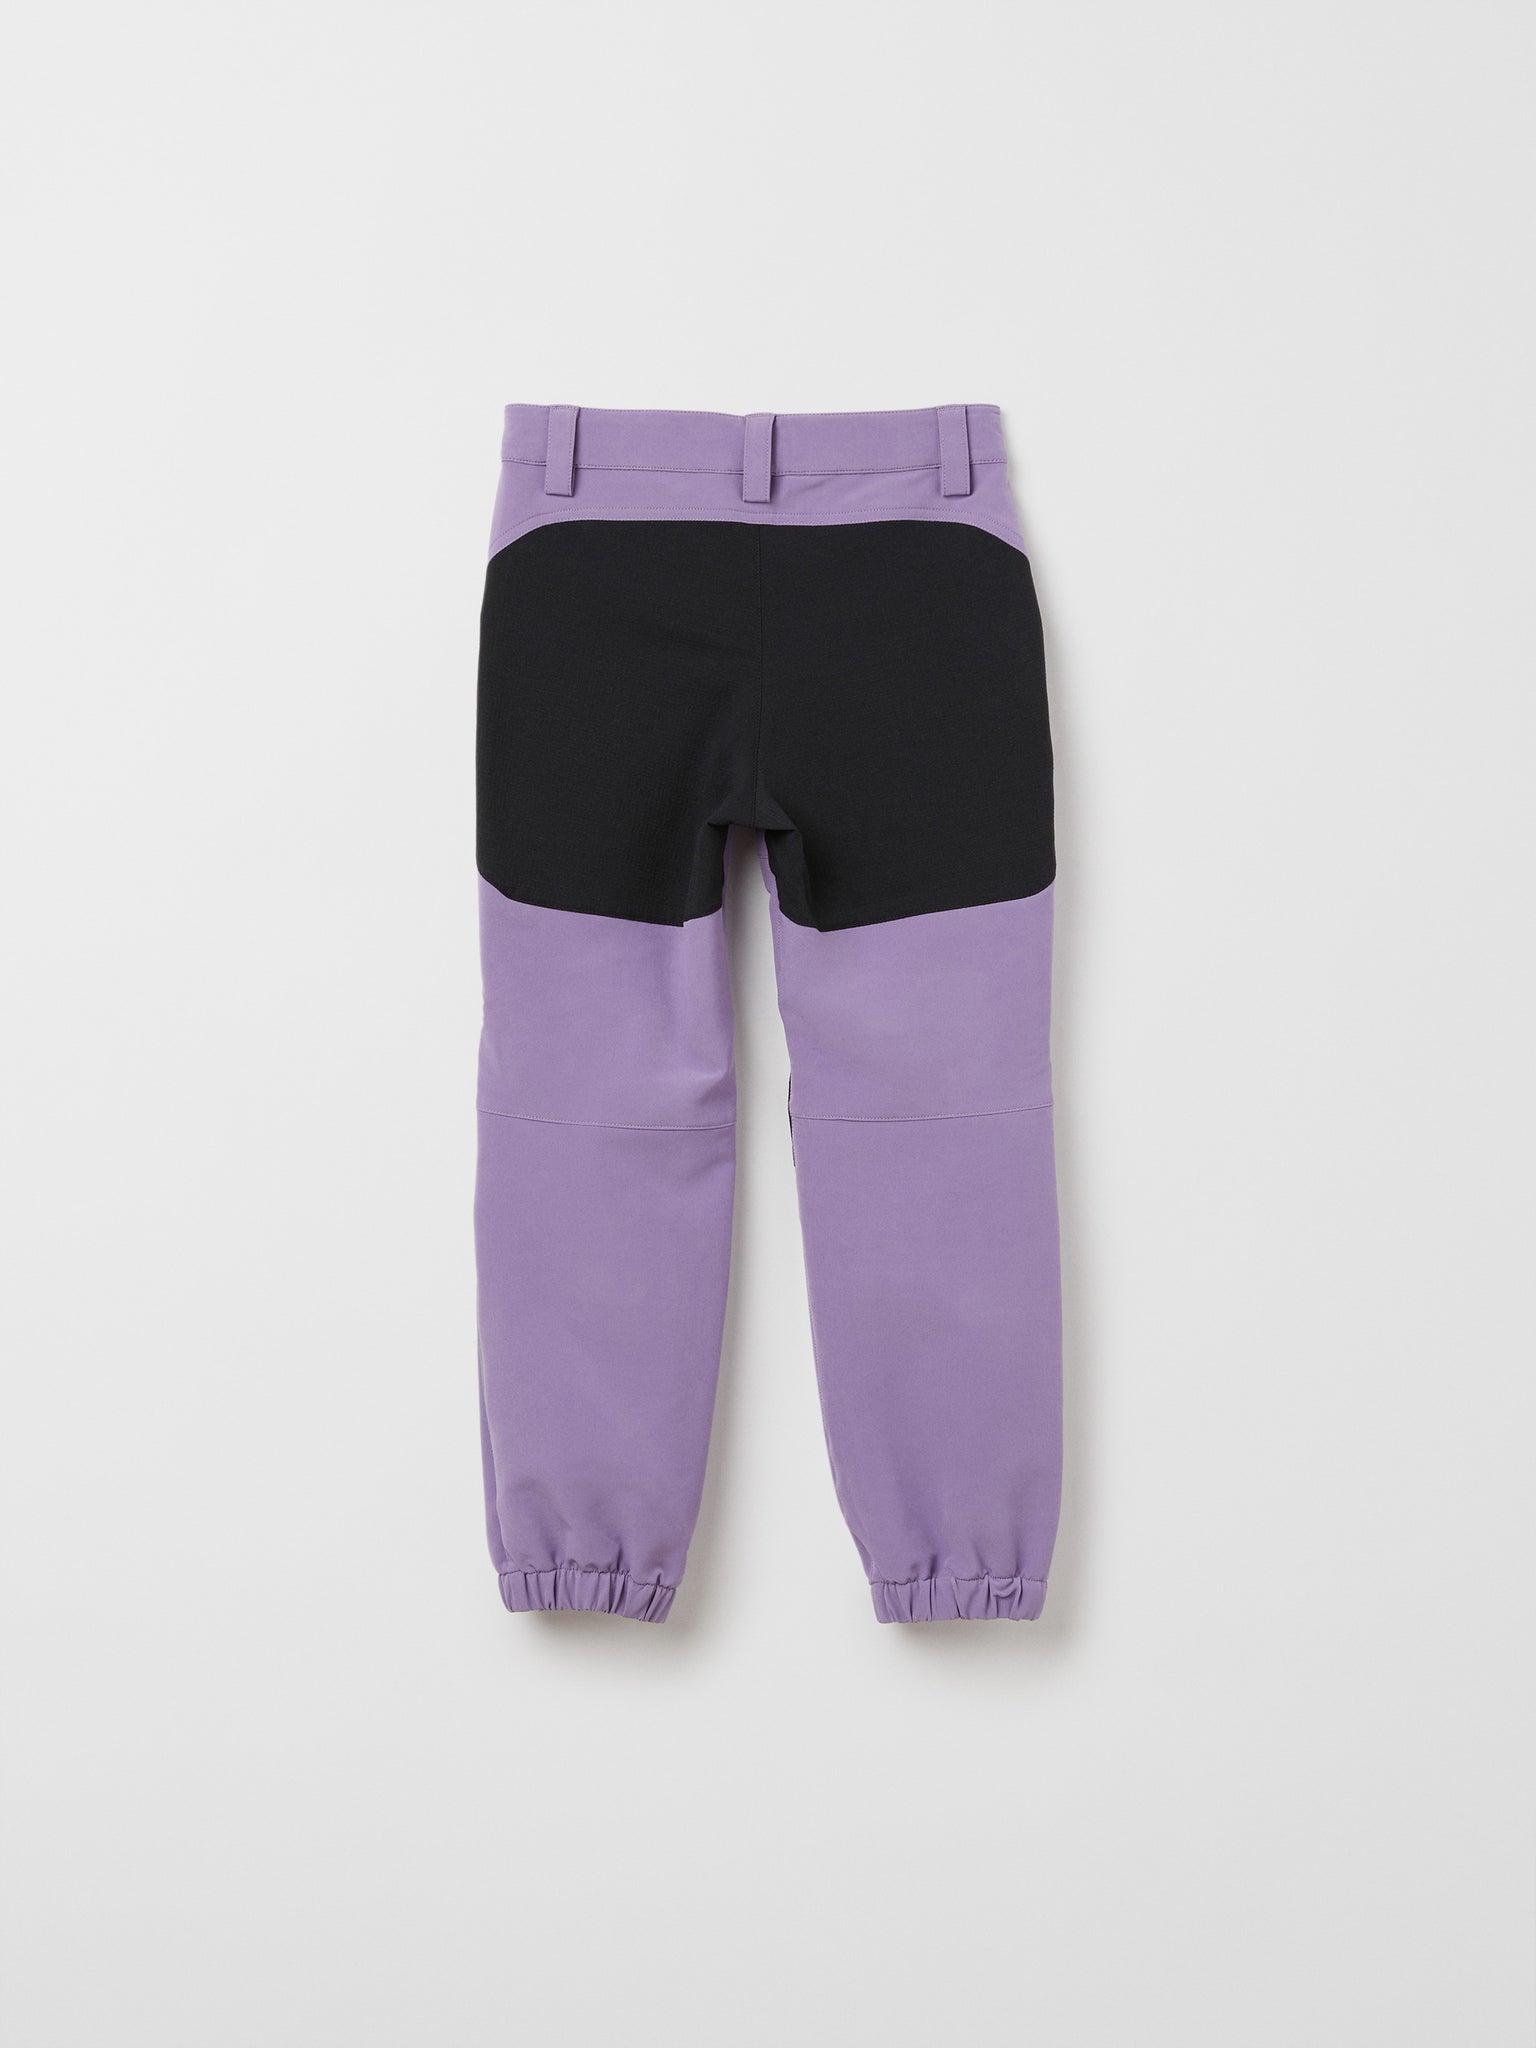 Waterproof Kids Trousers from the Polarn O. Pyret kidswear collection. Quality kids clothing made to last.